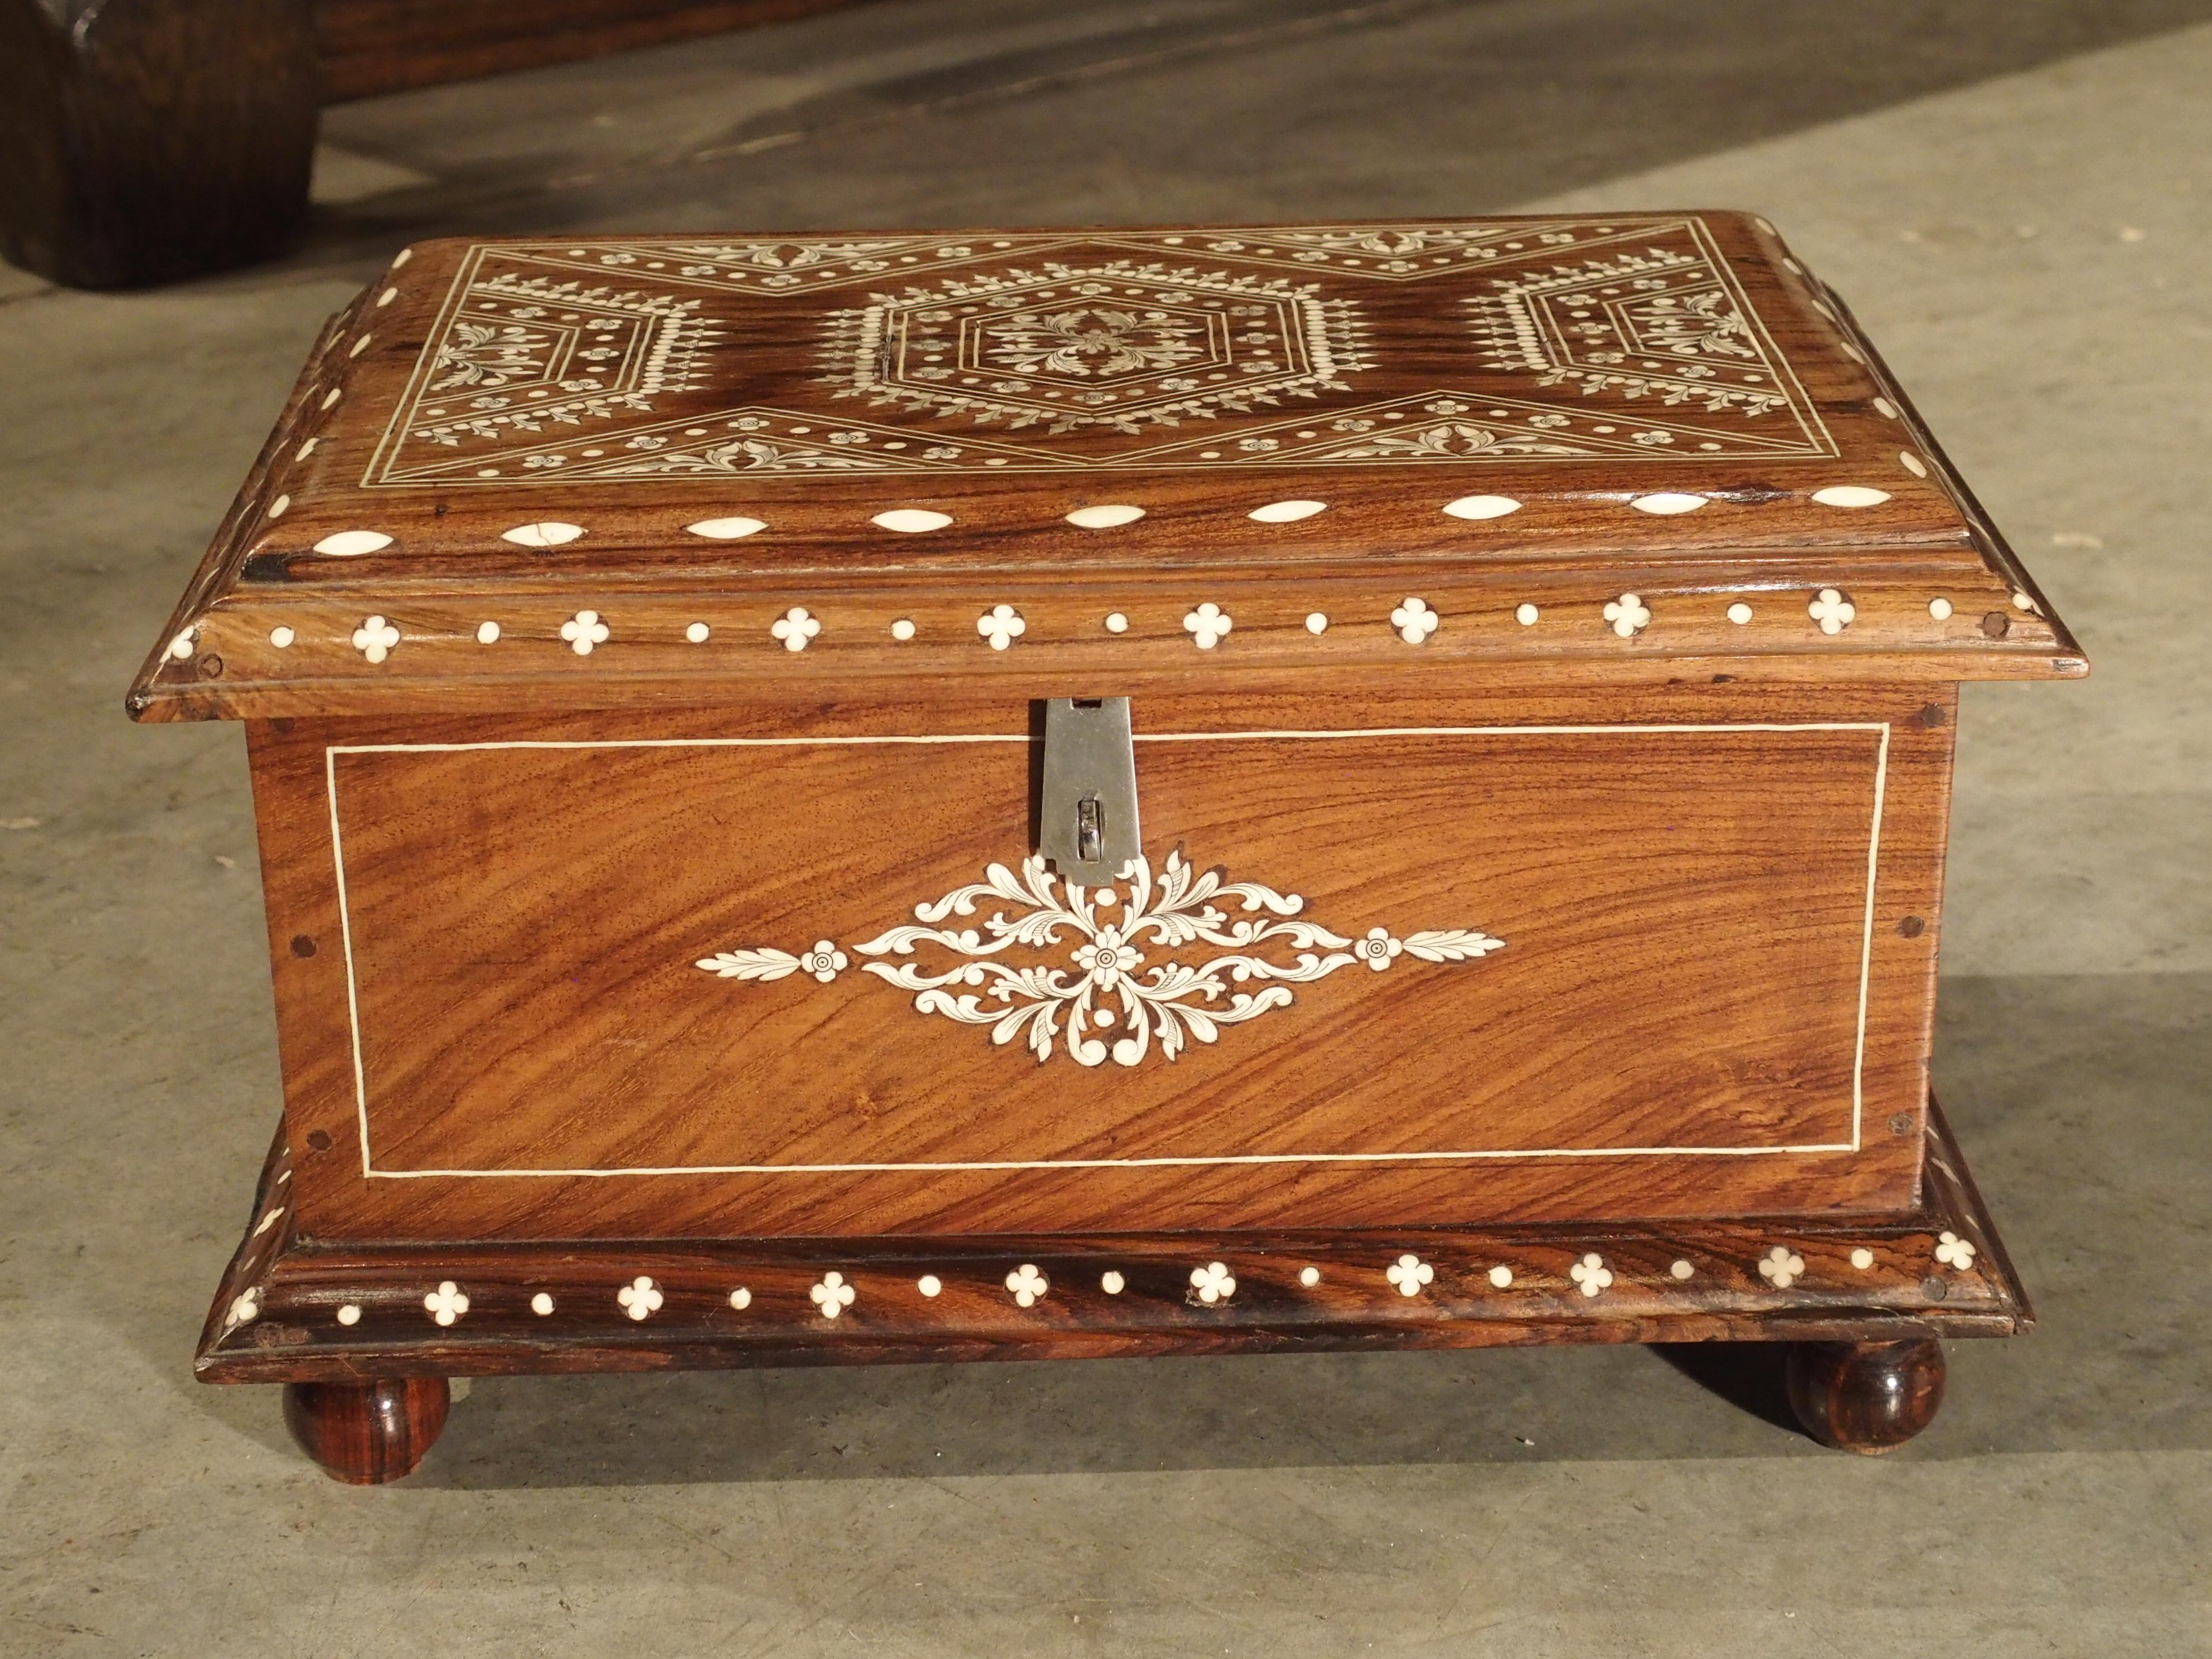 This lovely 19th century table trunk from Southern Iberia has been carved from exotic wood and intricately decorated with inlaid bone.

The Iberian Peninsula is separated from North Africa (specifically Morocco) by the Strait of Gibraltar. At its